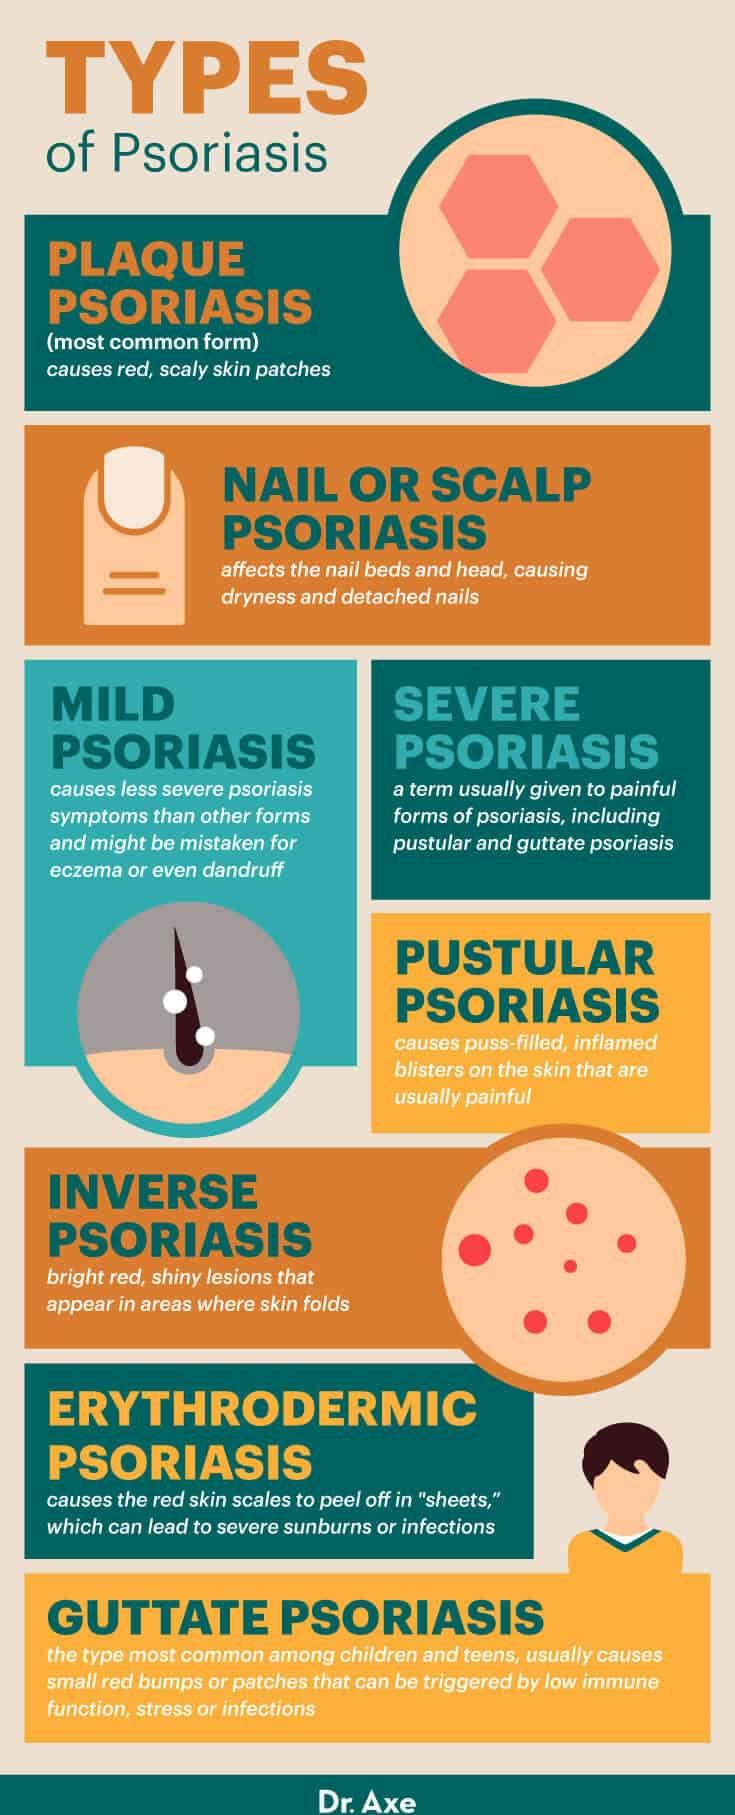 Types of psoriasis - Dr. Axe